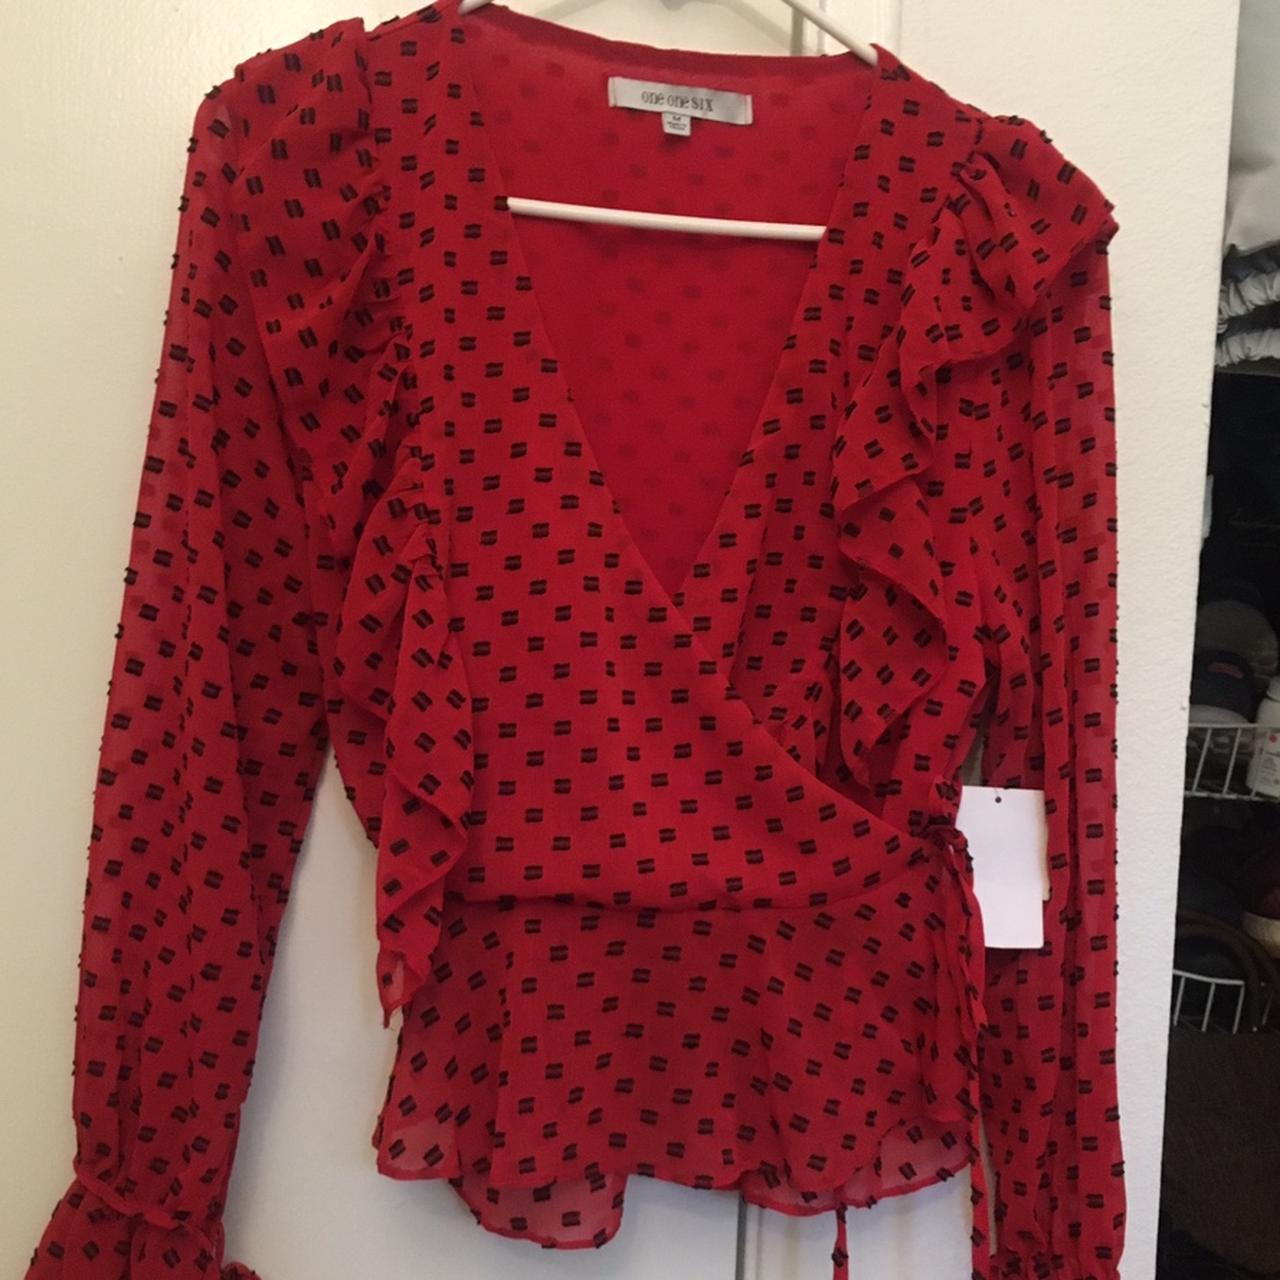 Product Image 1 - Beautiful red blouse

Brand new with